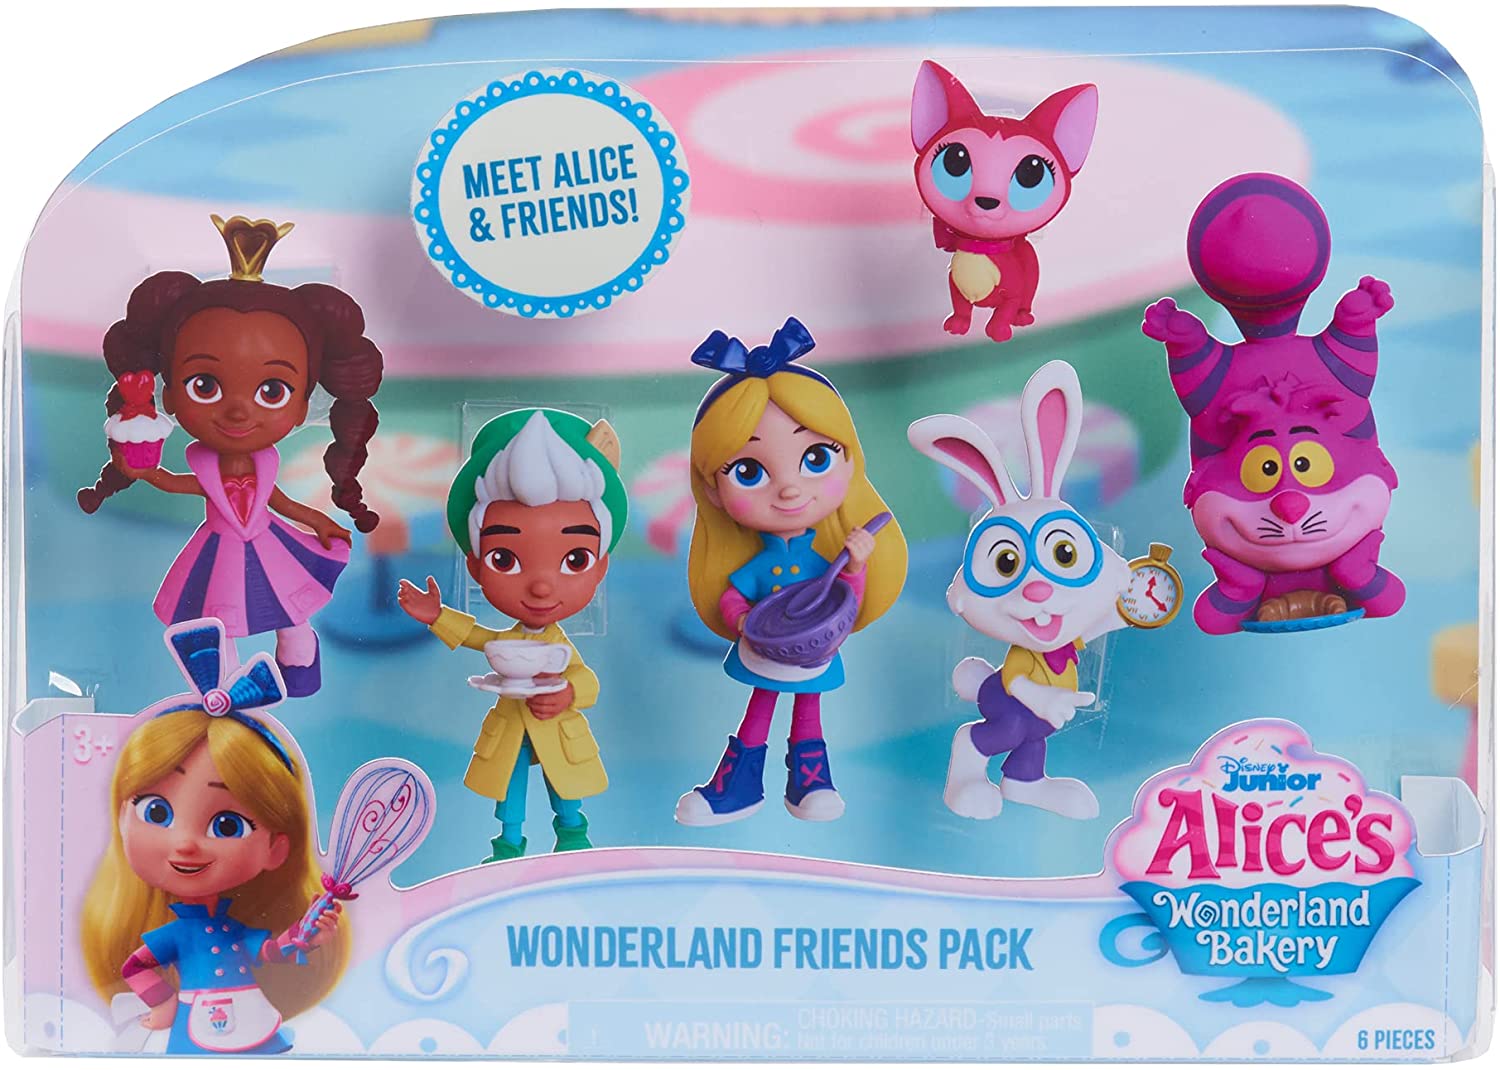  Disney Junior Alice's Wonderland Bakery Playset and Toy  Figures, 15 Pieces, Officially Licensed Kids Toys for Ages 3 Up,   Exclusive : Toys & Games